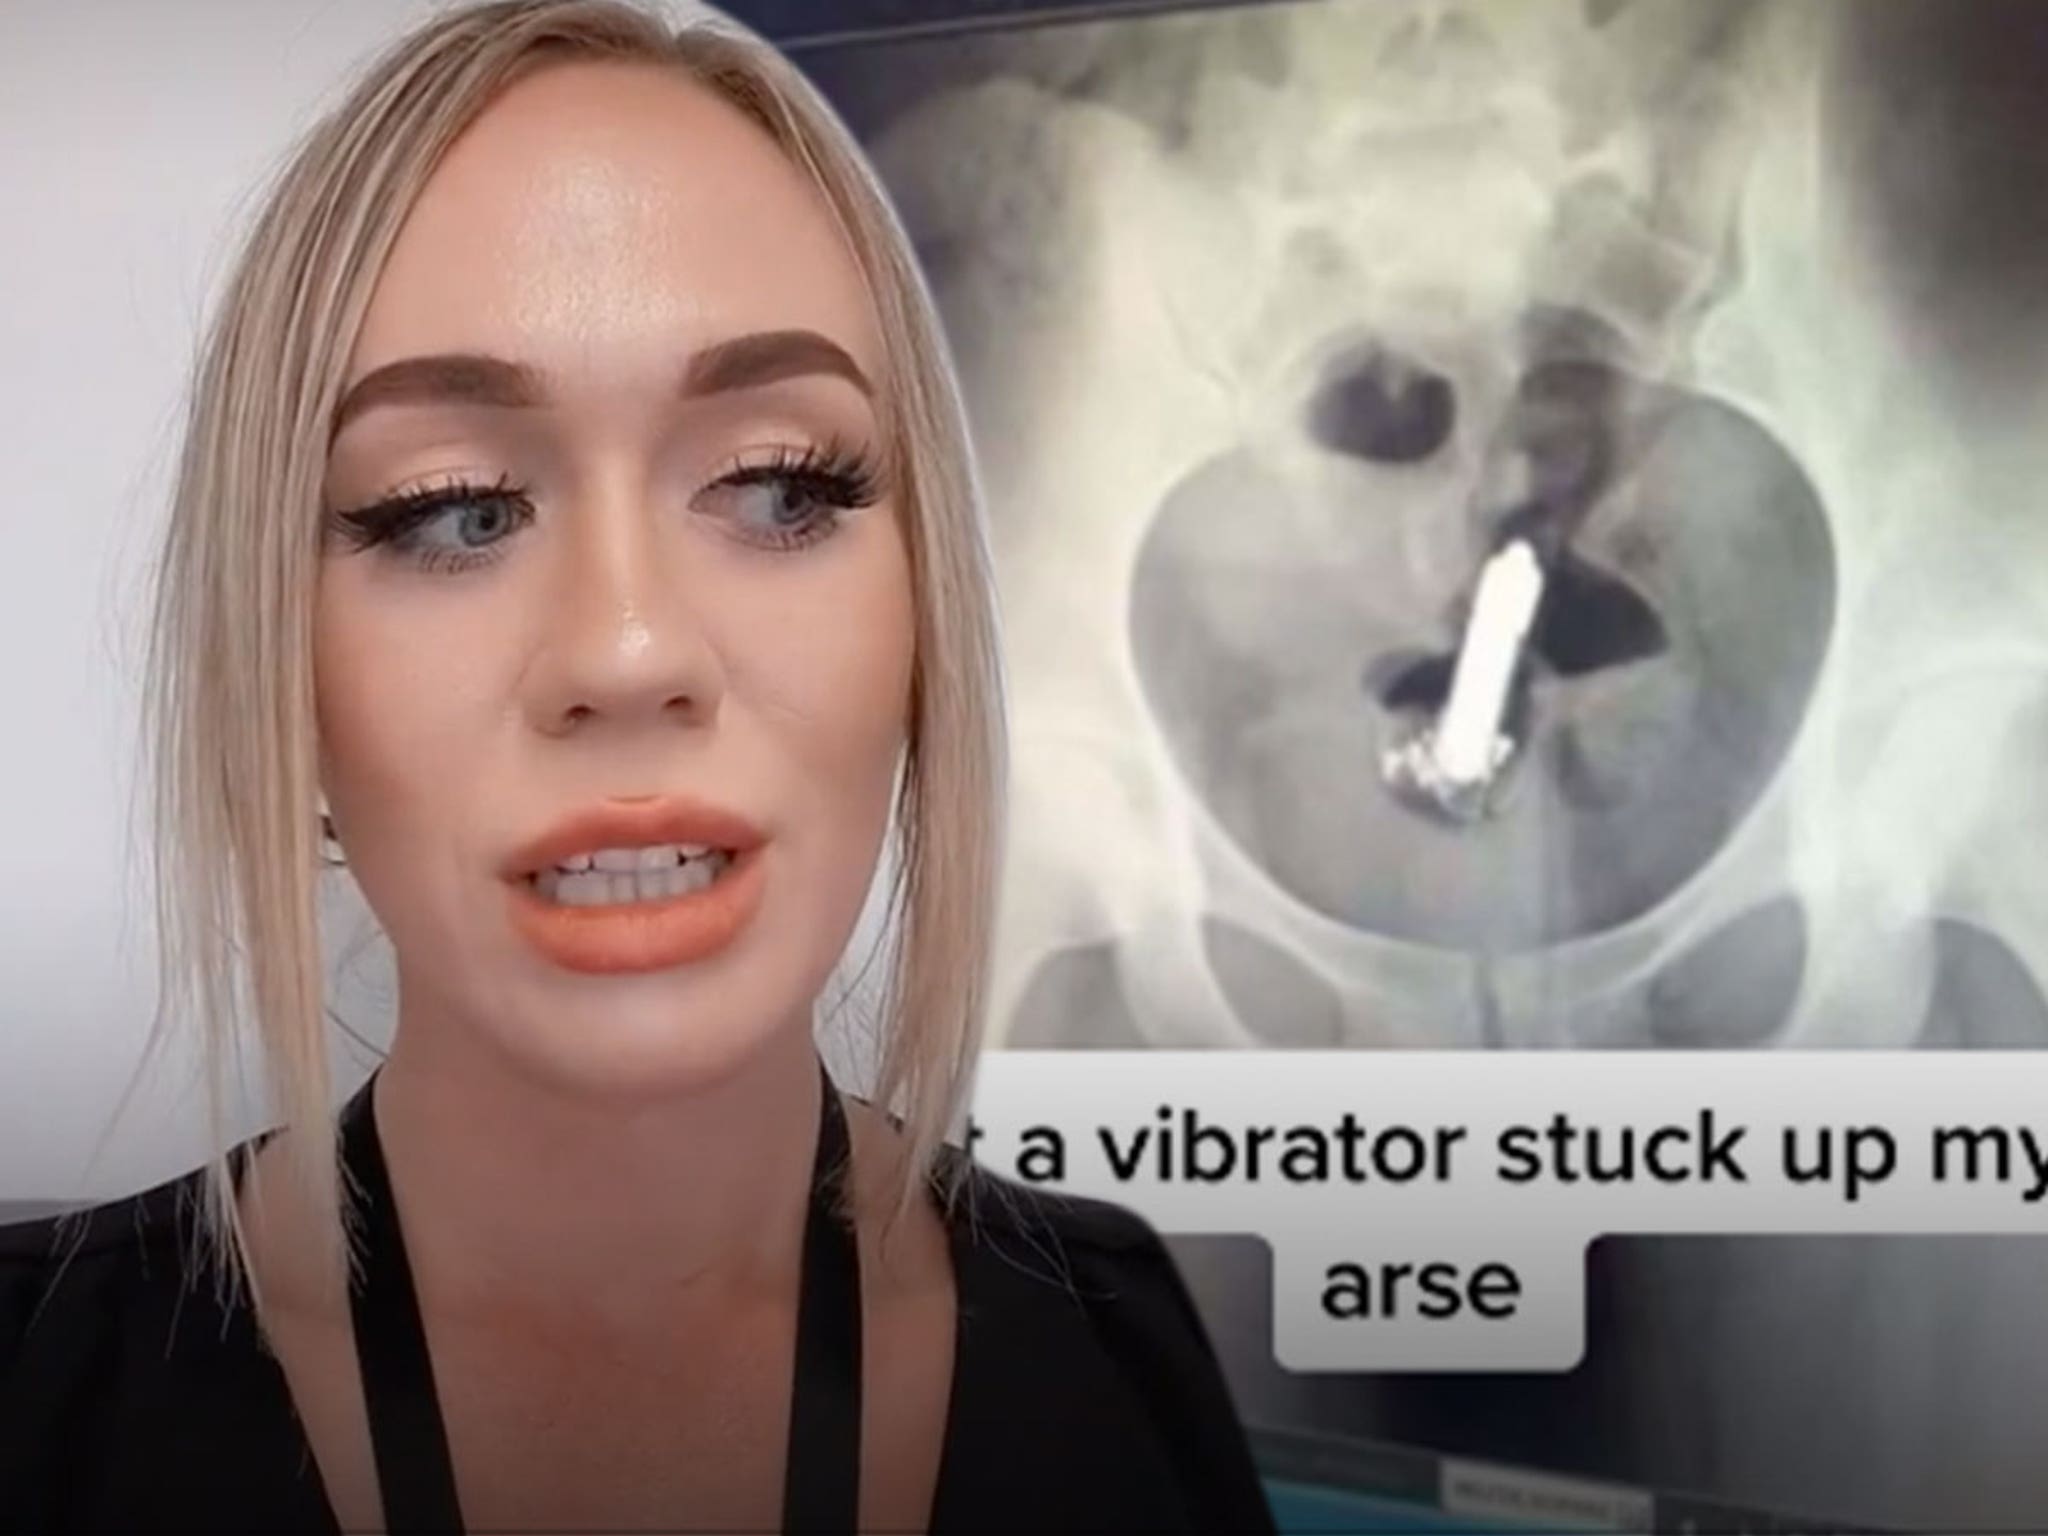 TikTok Star Says She Needed Surgery After Losing Vibrator in Butt picture